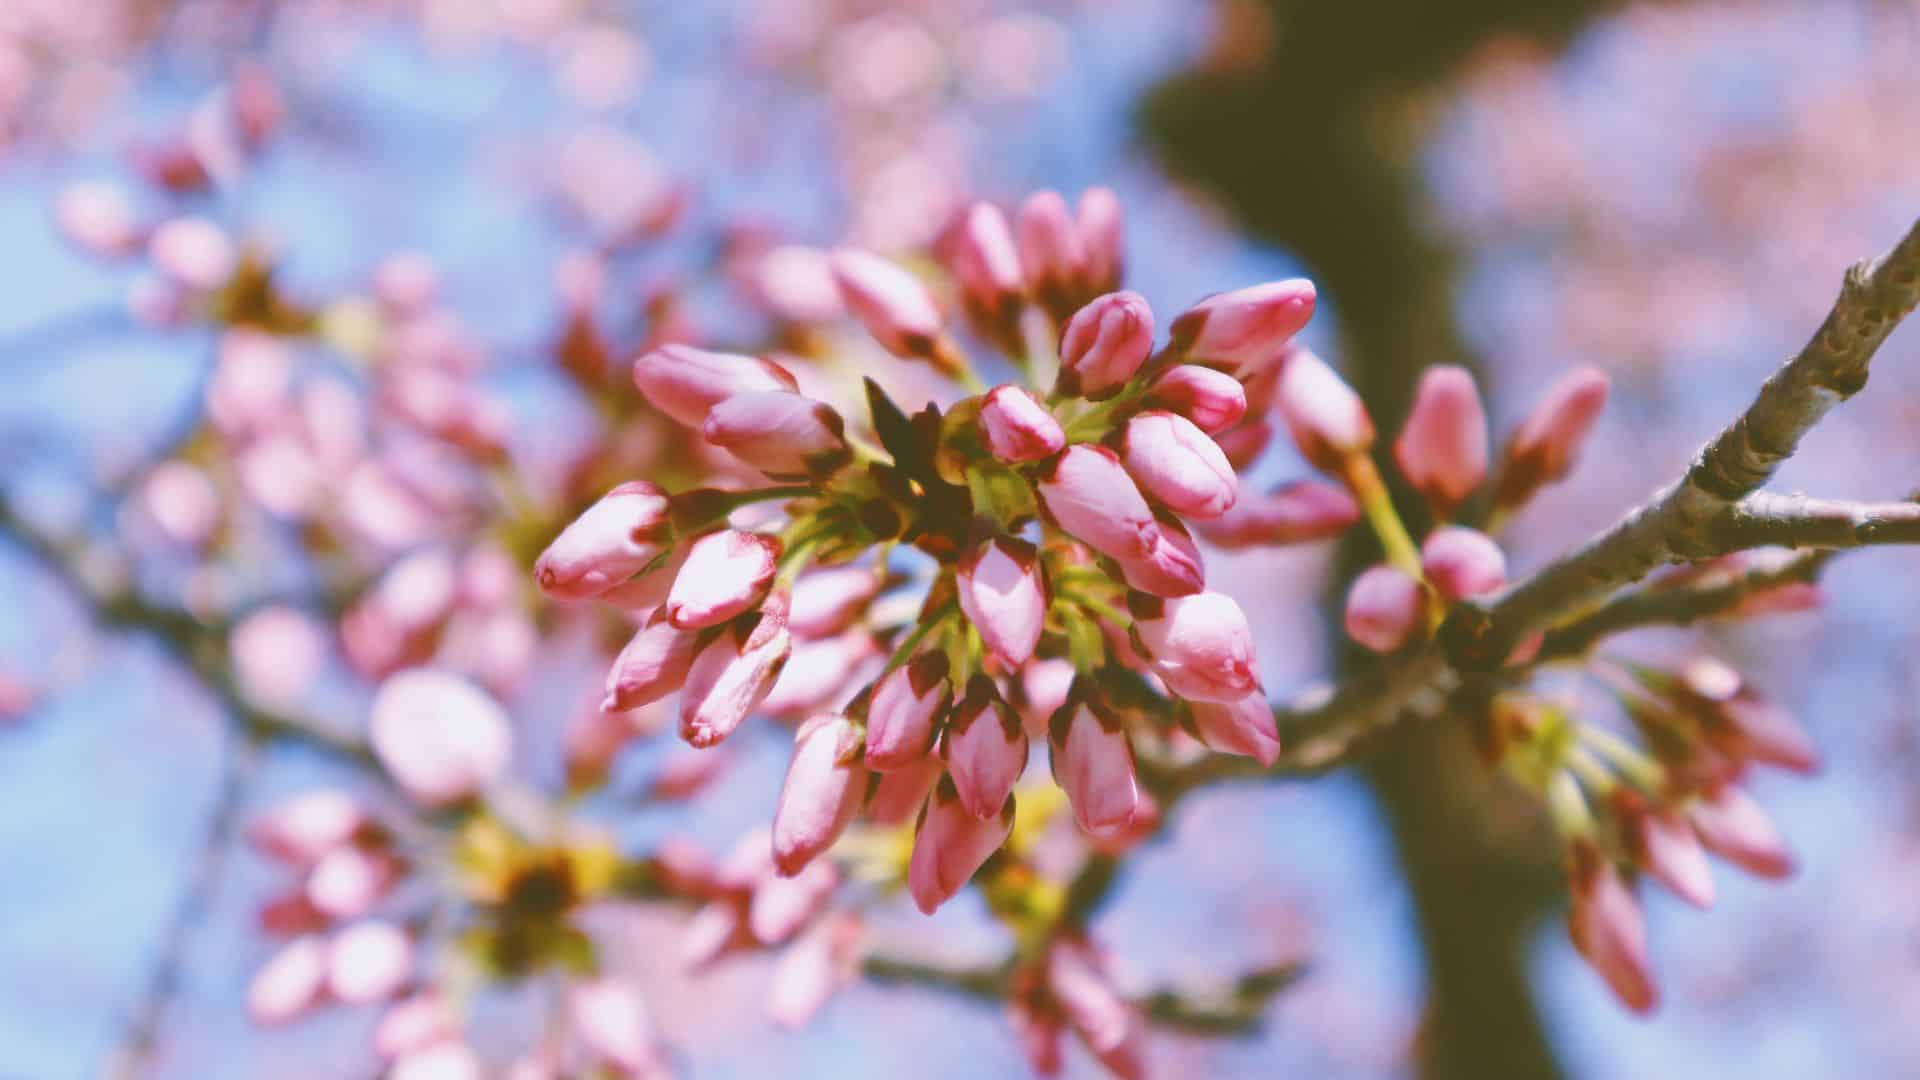 pink buds on a tree beginning to blossom